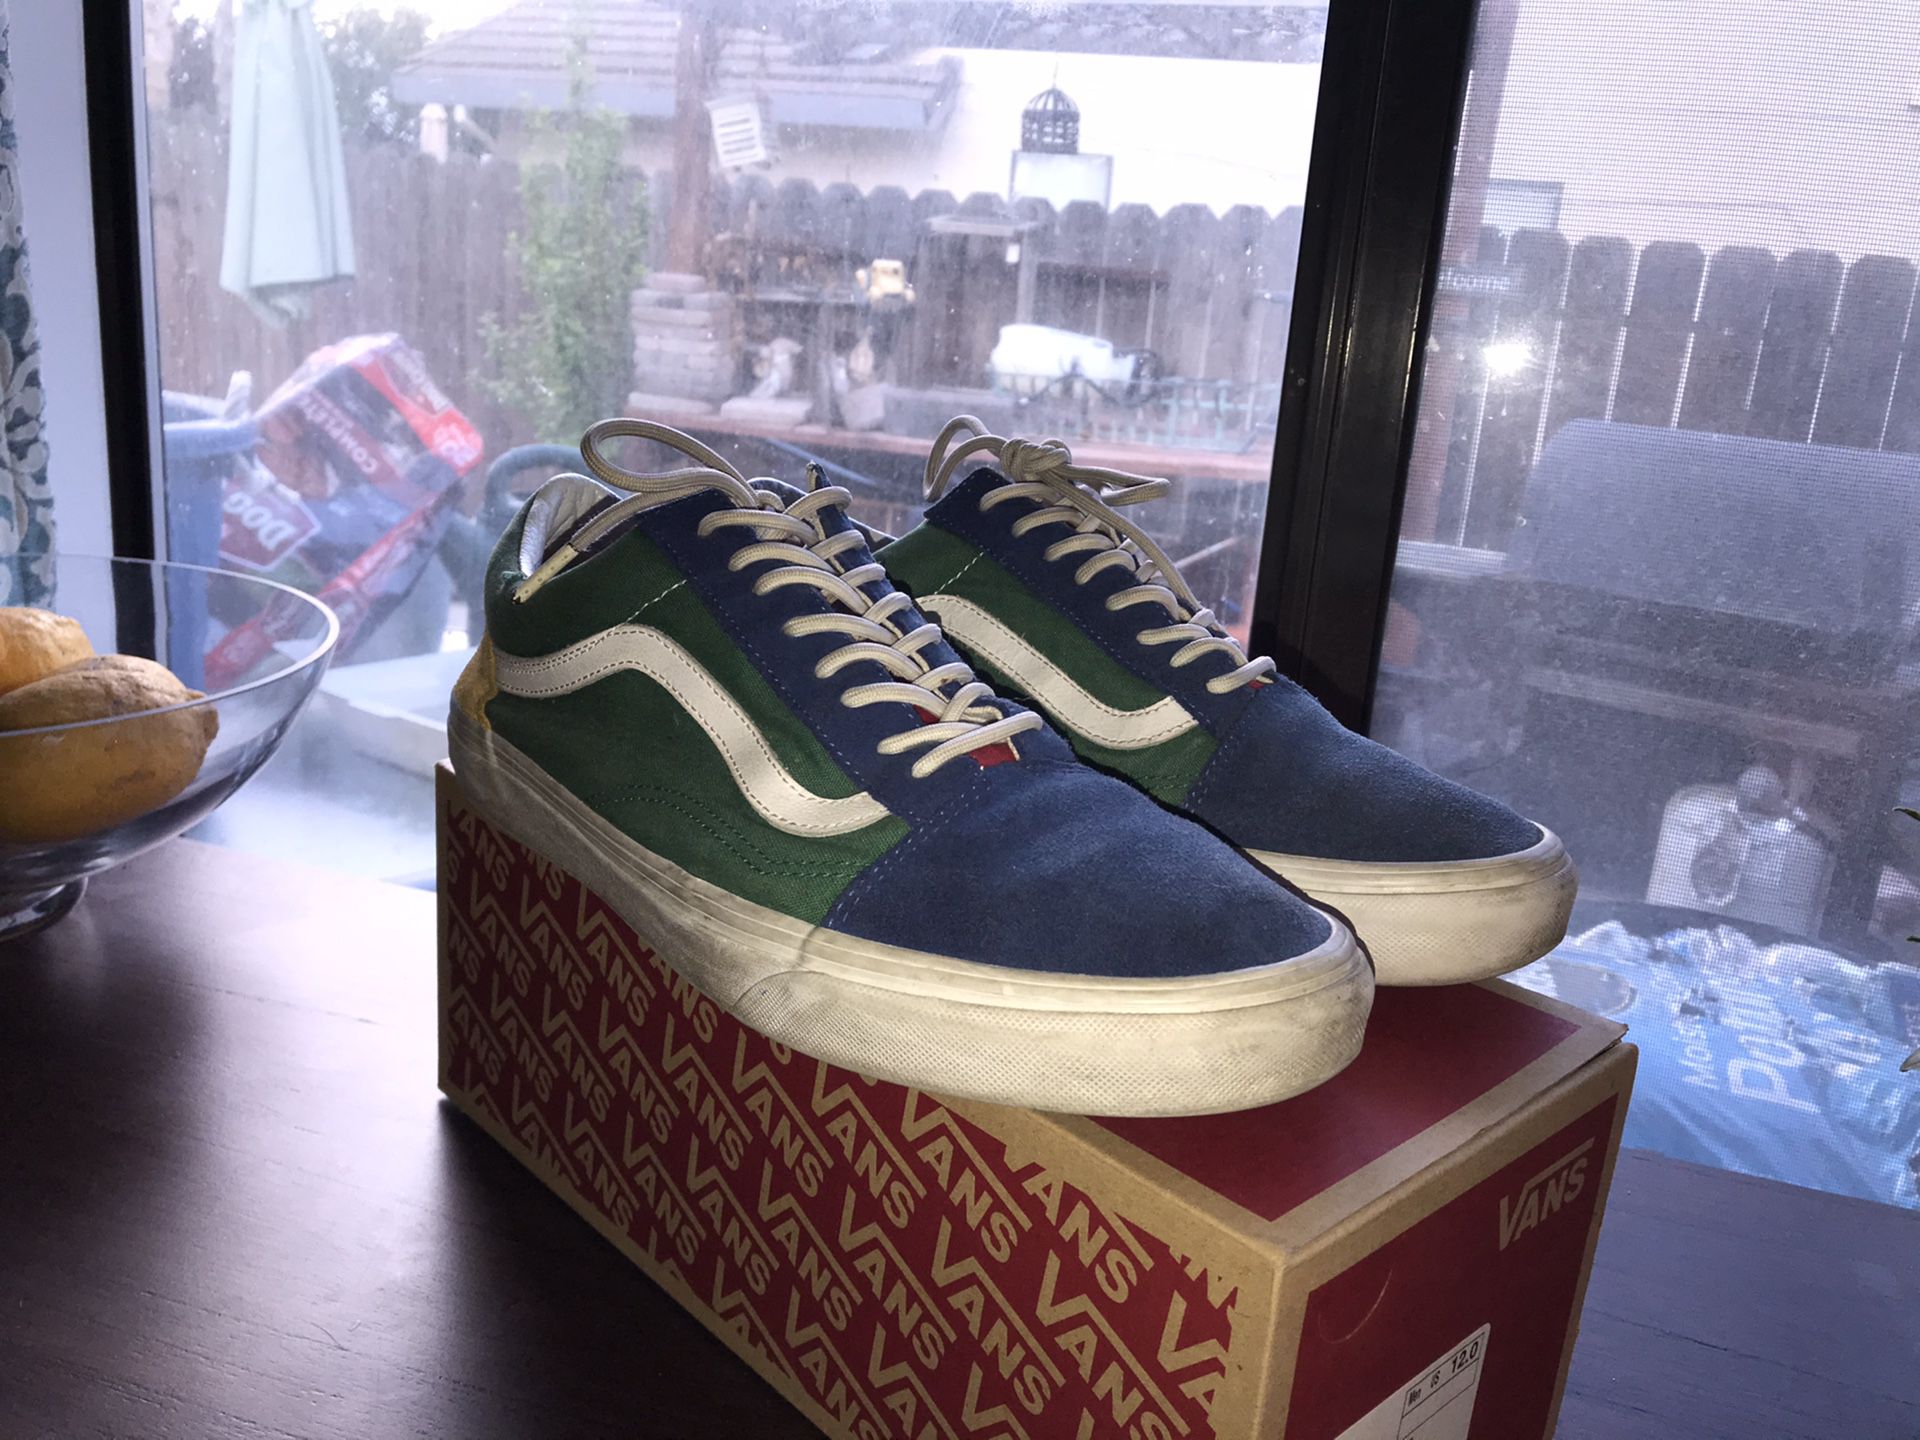 Yacht Club vans size 12 used